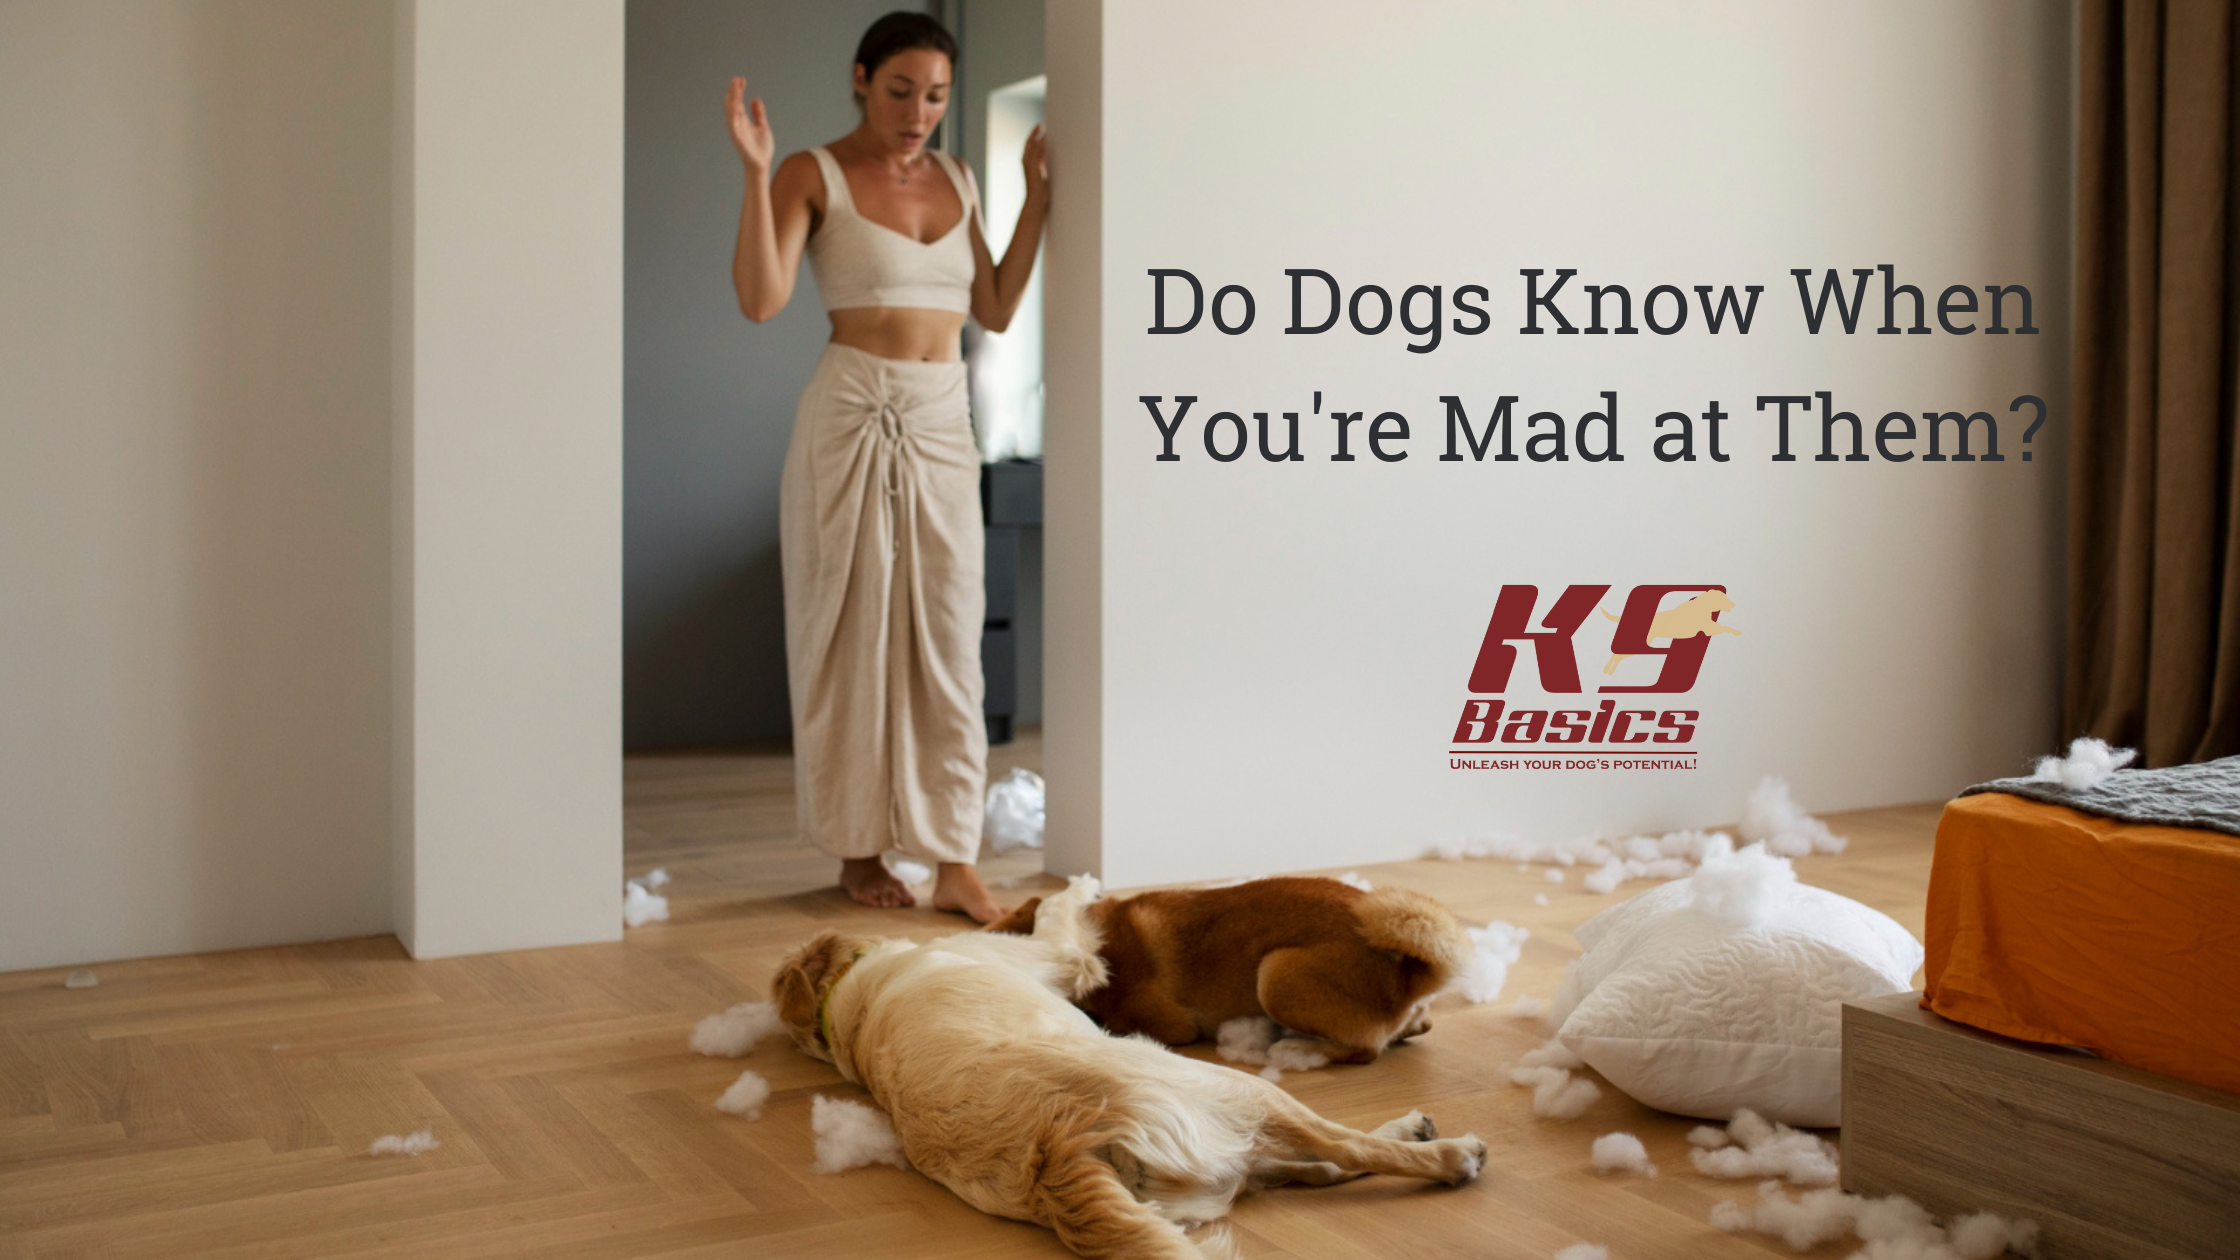 Do Dogs Know When You’re Mad at Them?